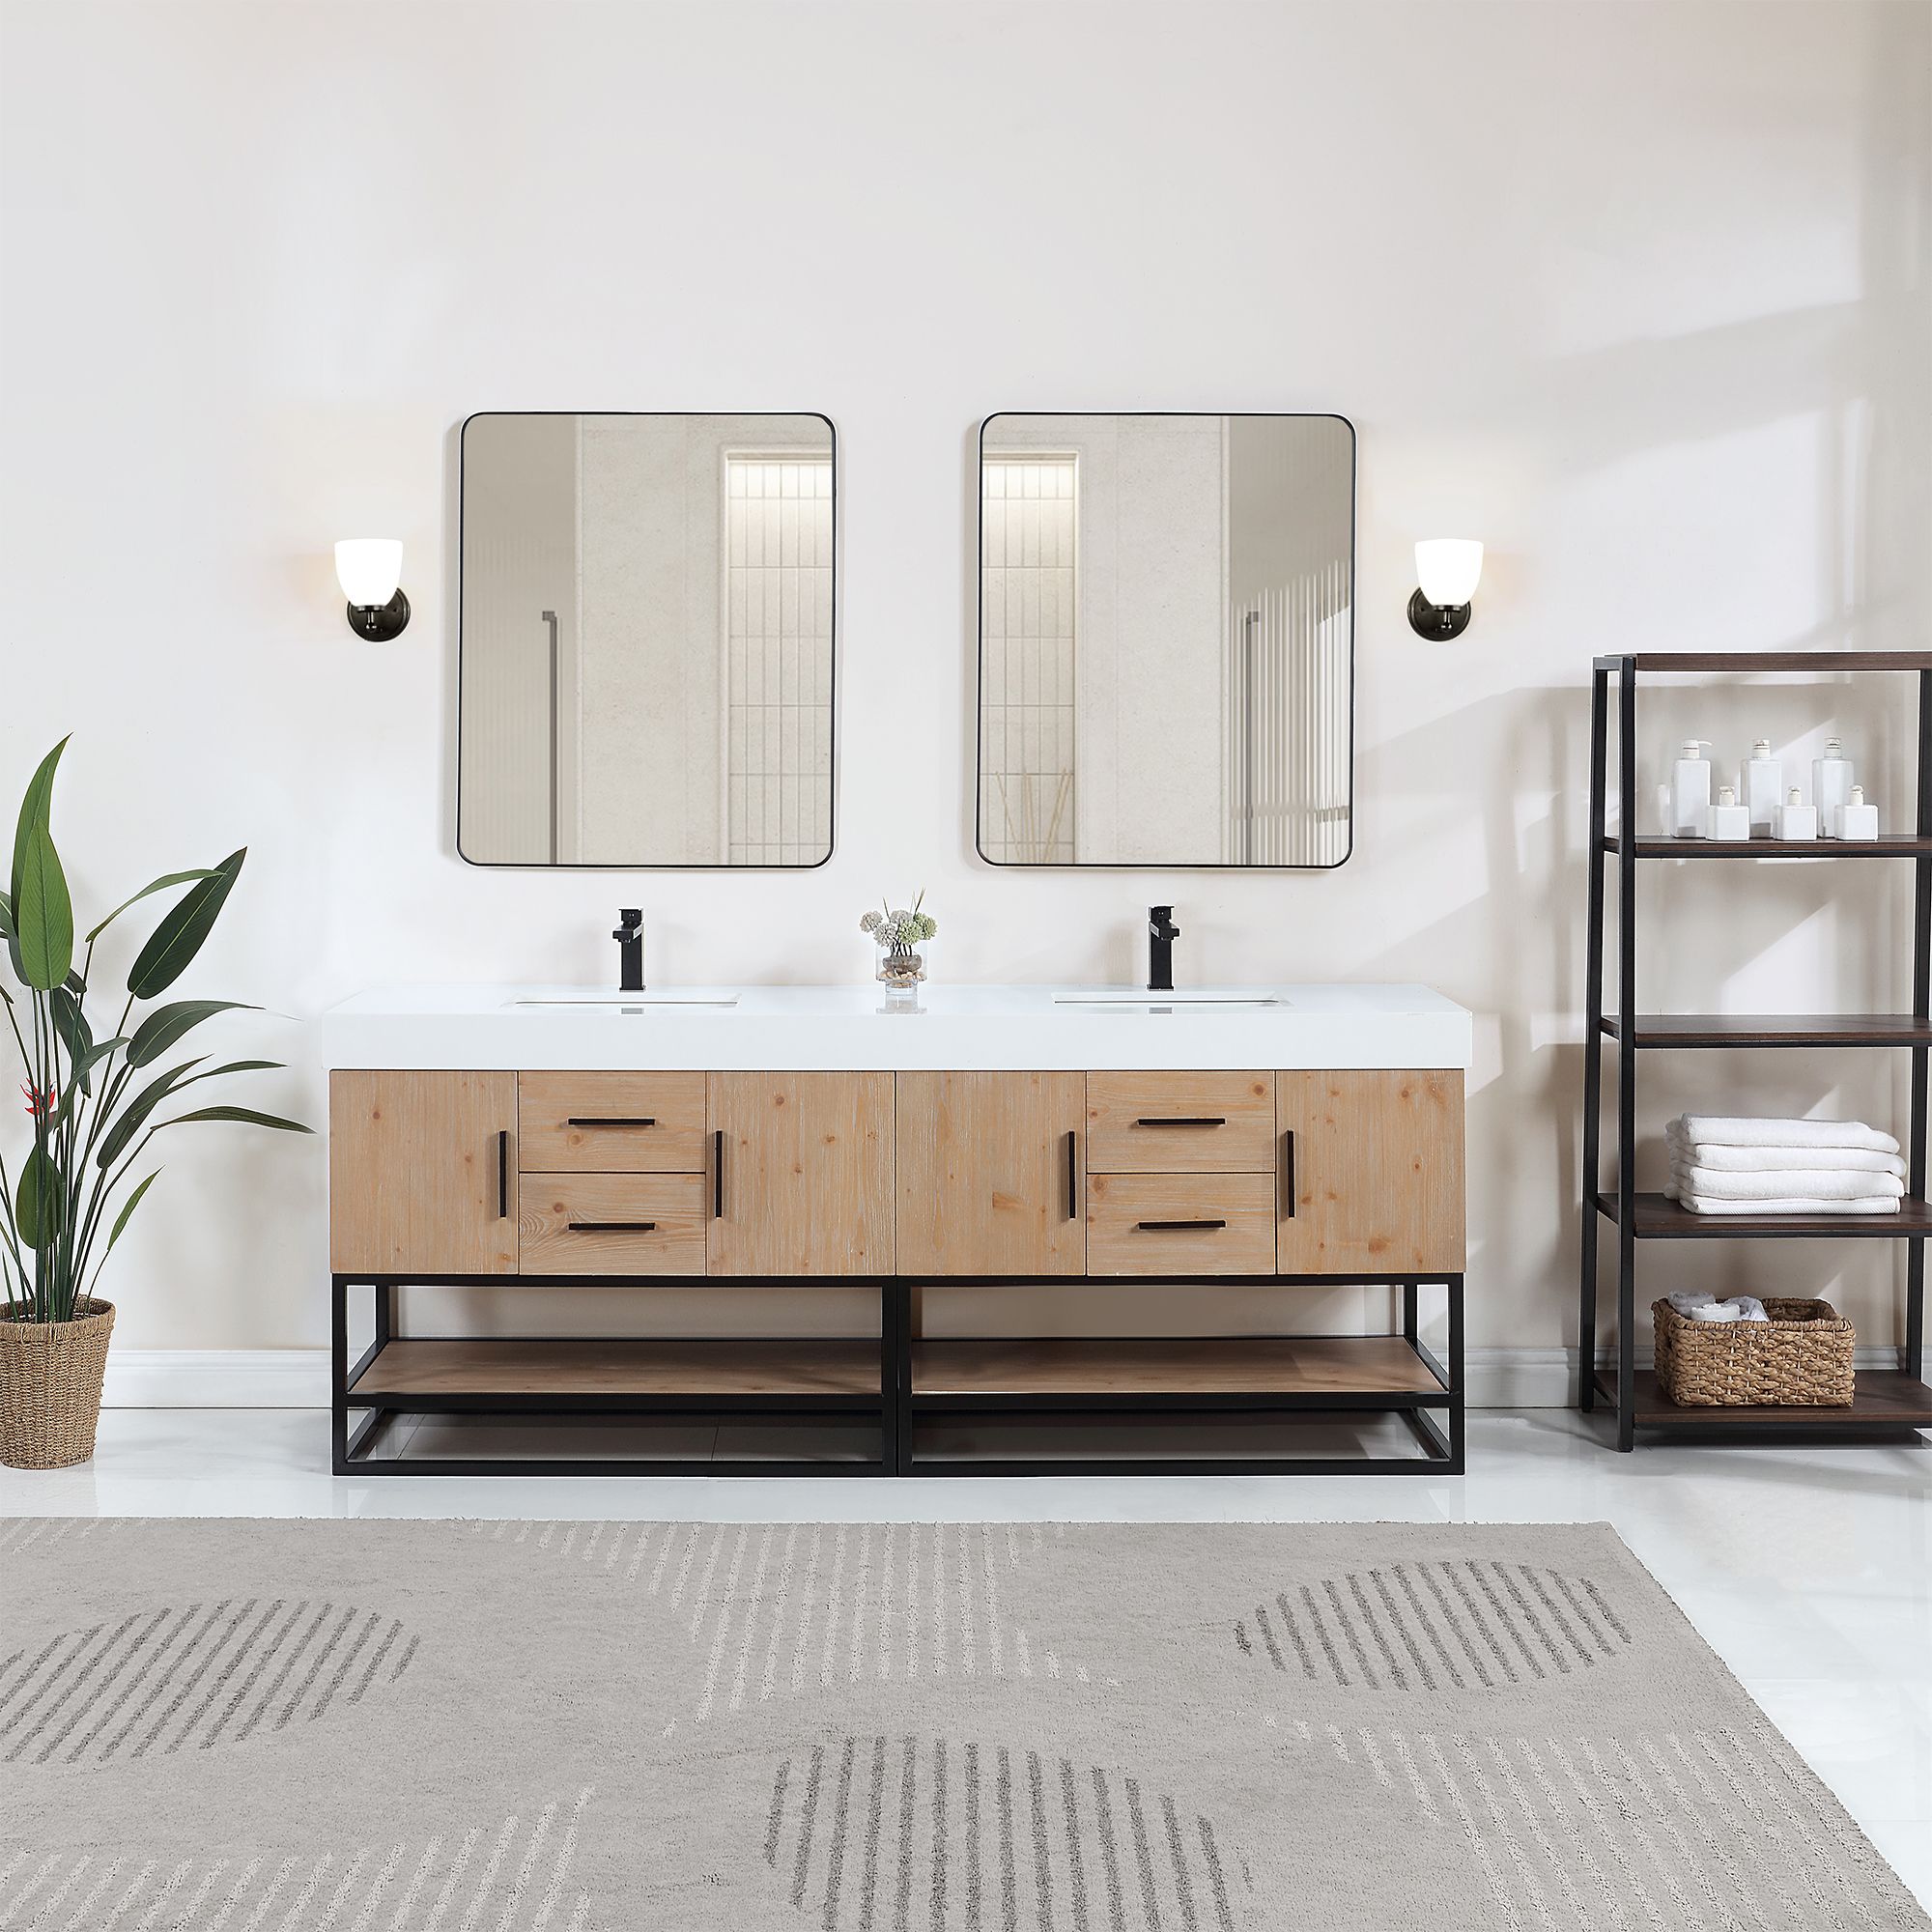 Issac Edwards 84" Double Bathroom Vanity in Light Brown with Matte Black Support Base and White Composite Stone Countertop with Mirror